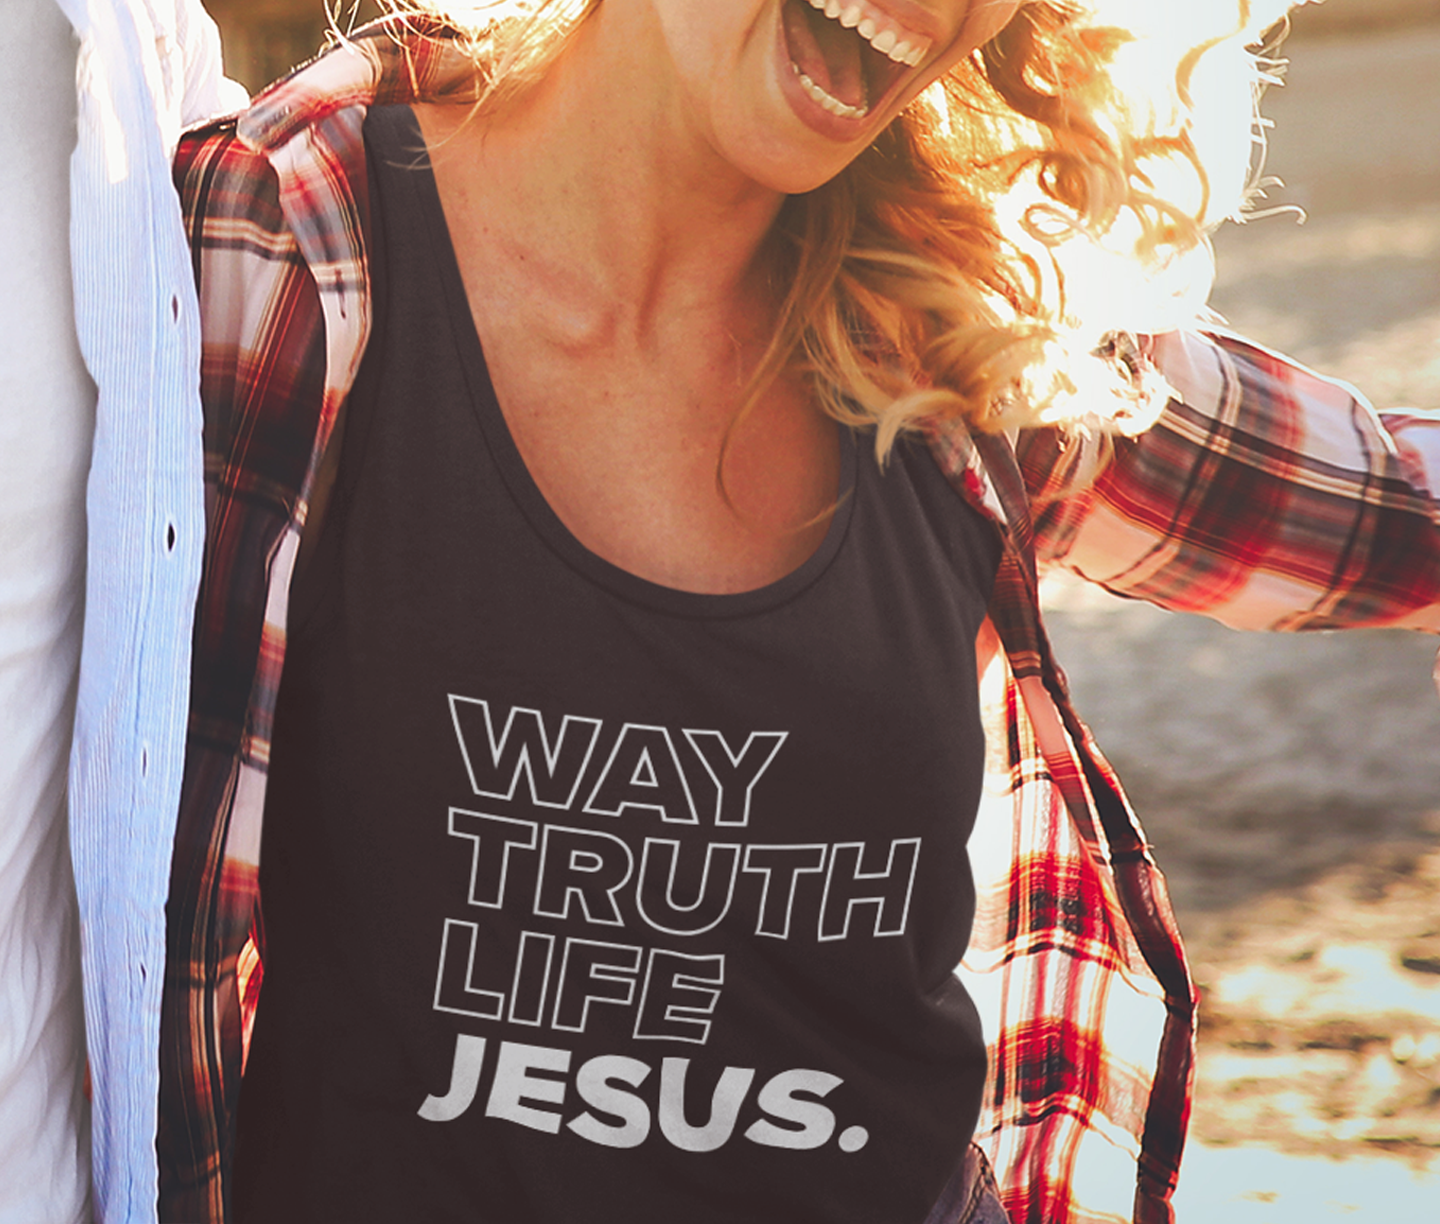 JESUS WAY TRUTH LIFE TANK FRONT - CHRISTIAN CLOTHING